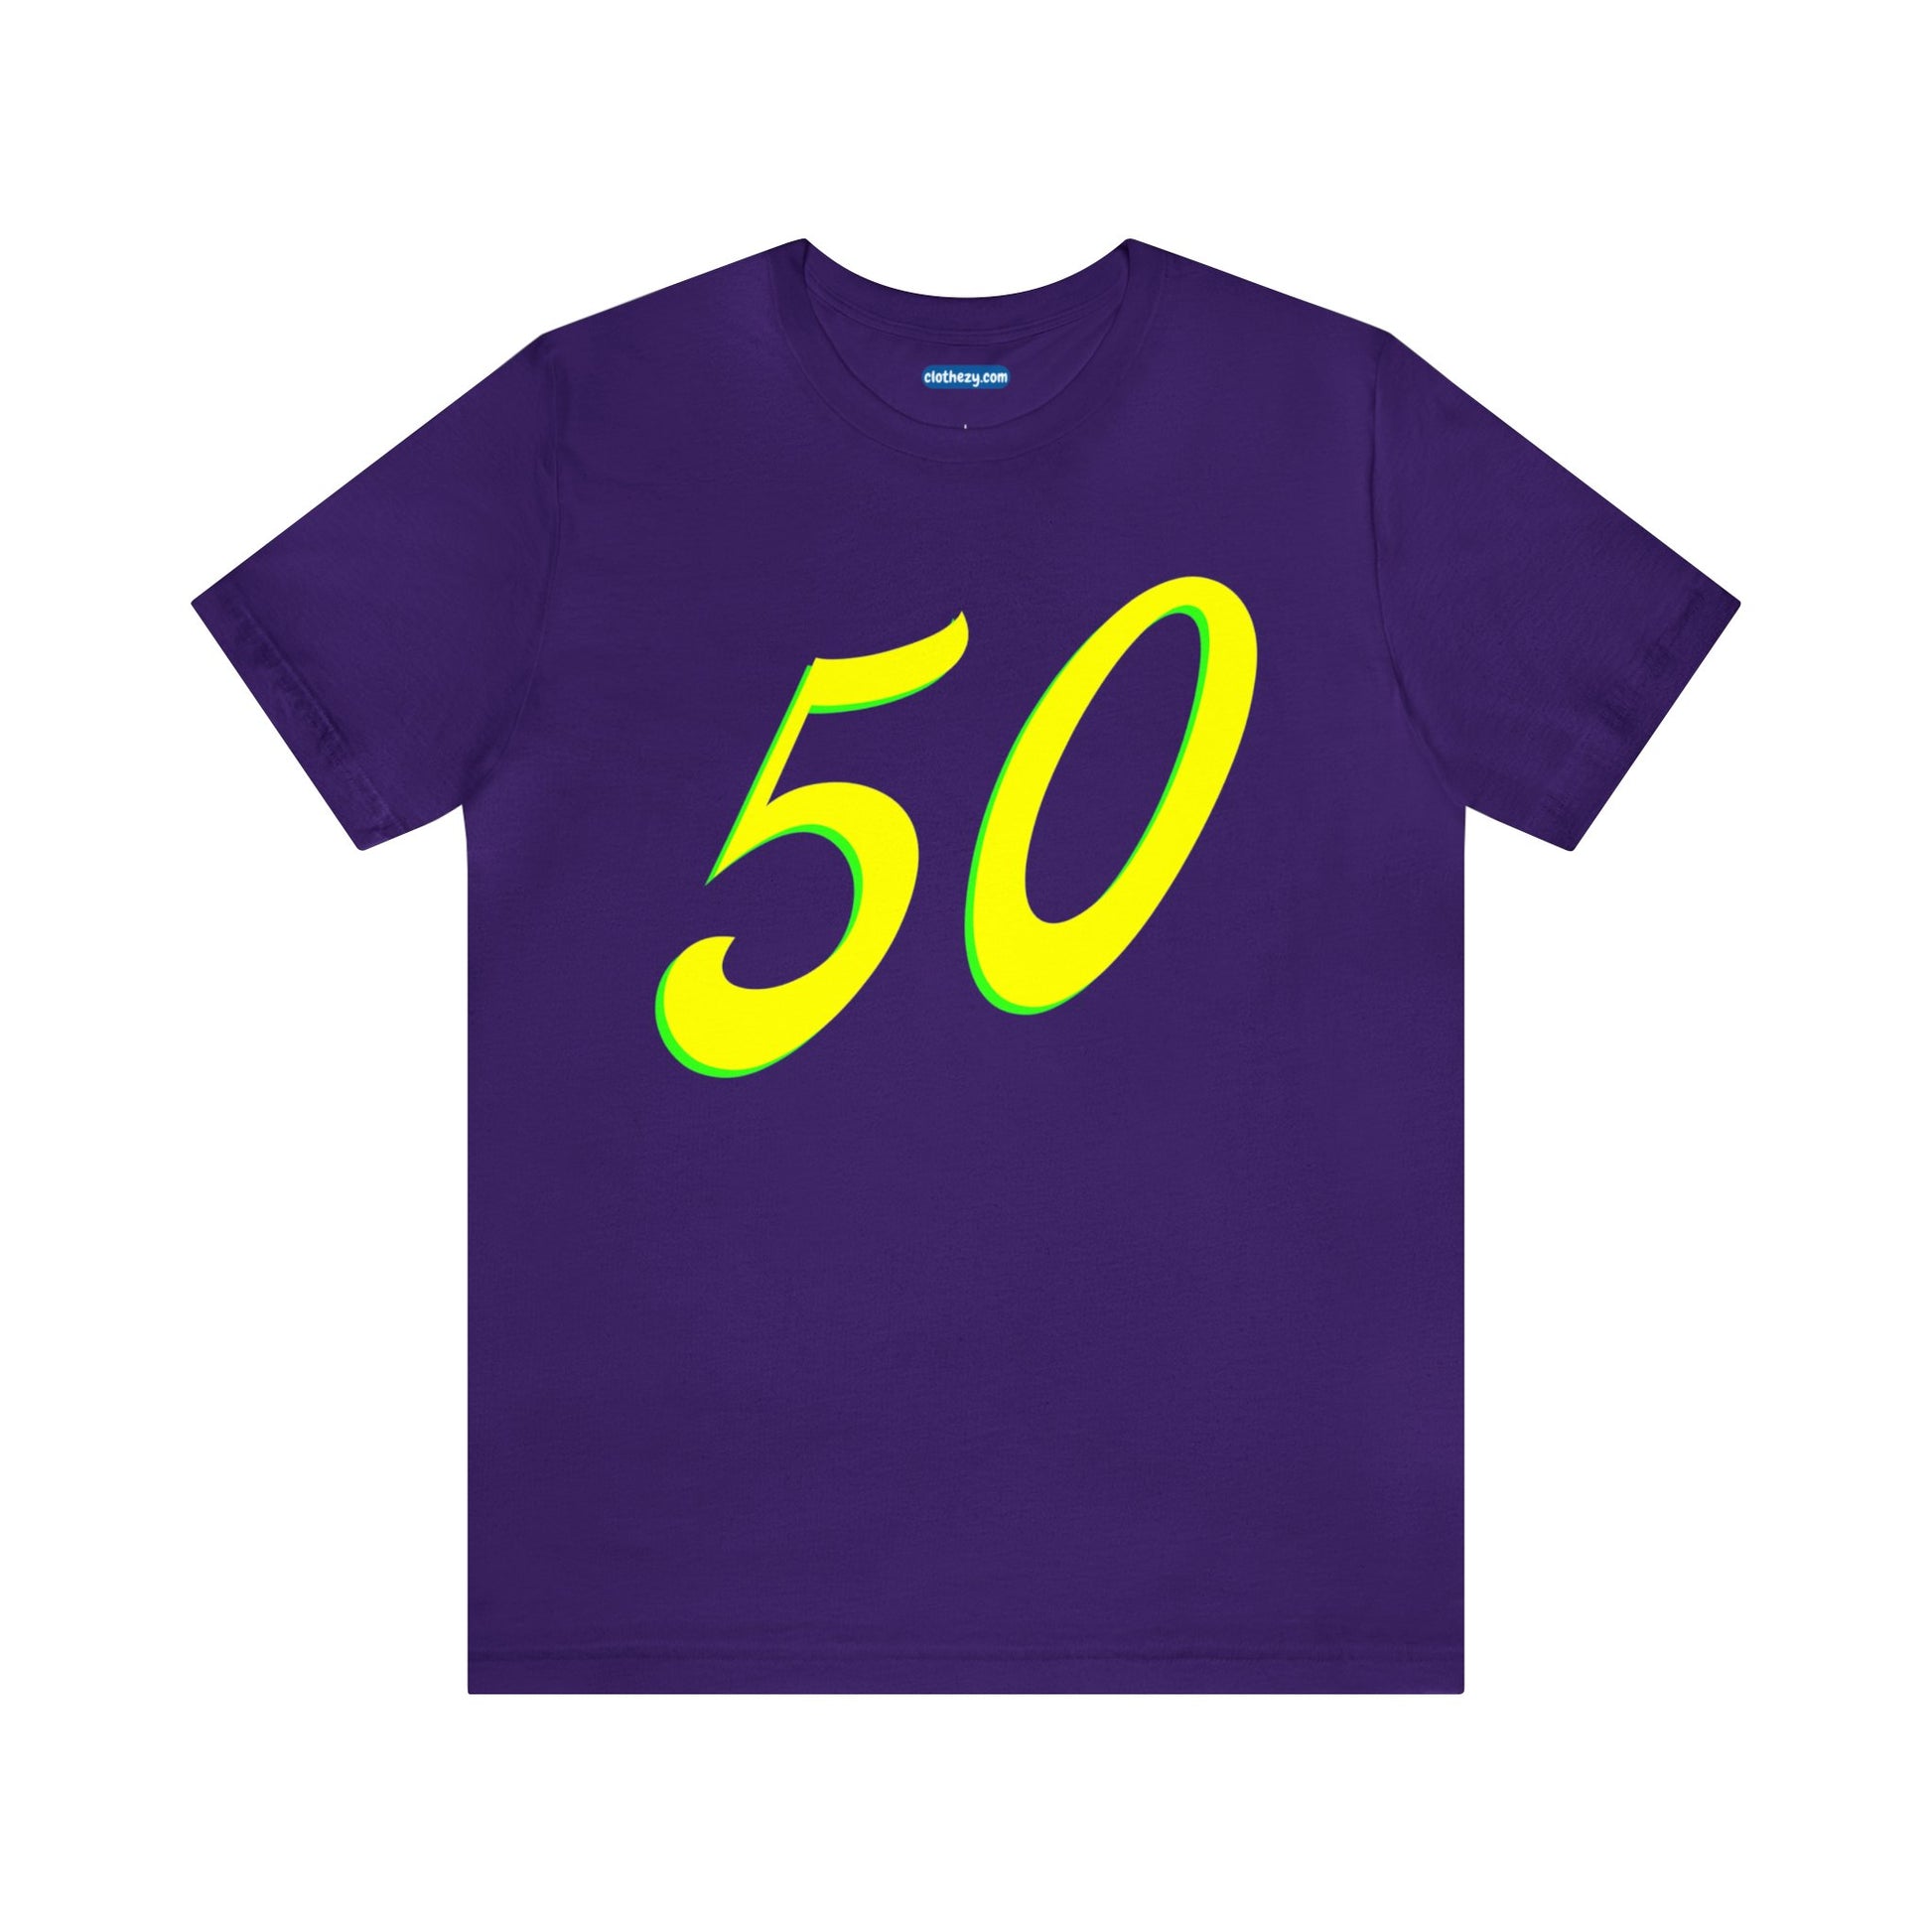 Number 50 Design - Soft Cotton Tee for birthdays and celebrations, Gift for friends and family, Multiple Options by clothezy.com in Purple Size Small - Buy Now